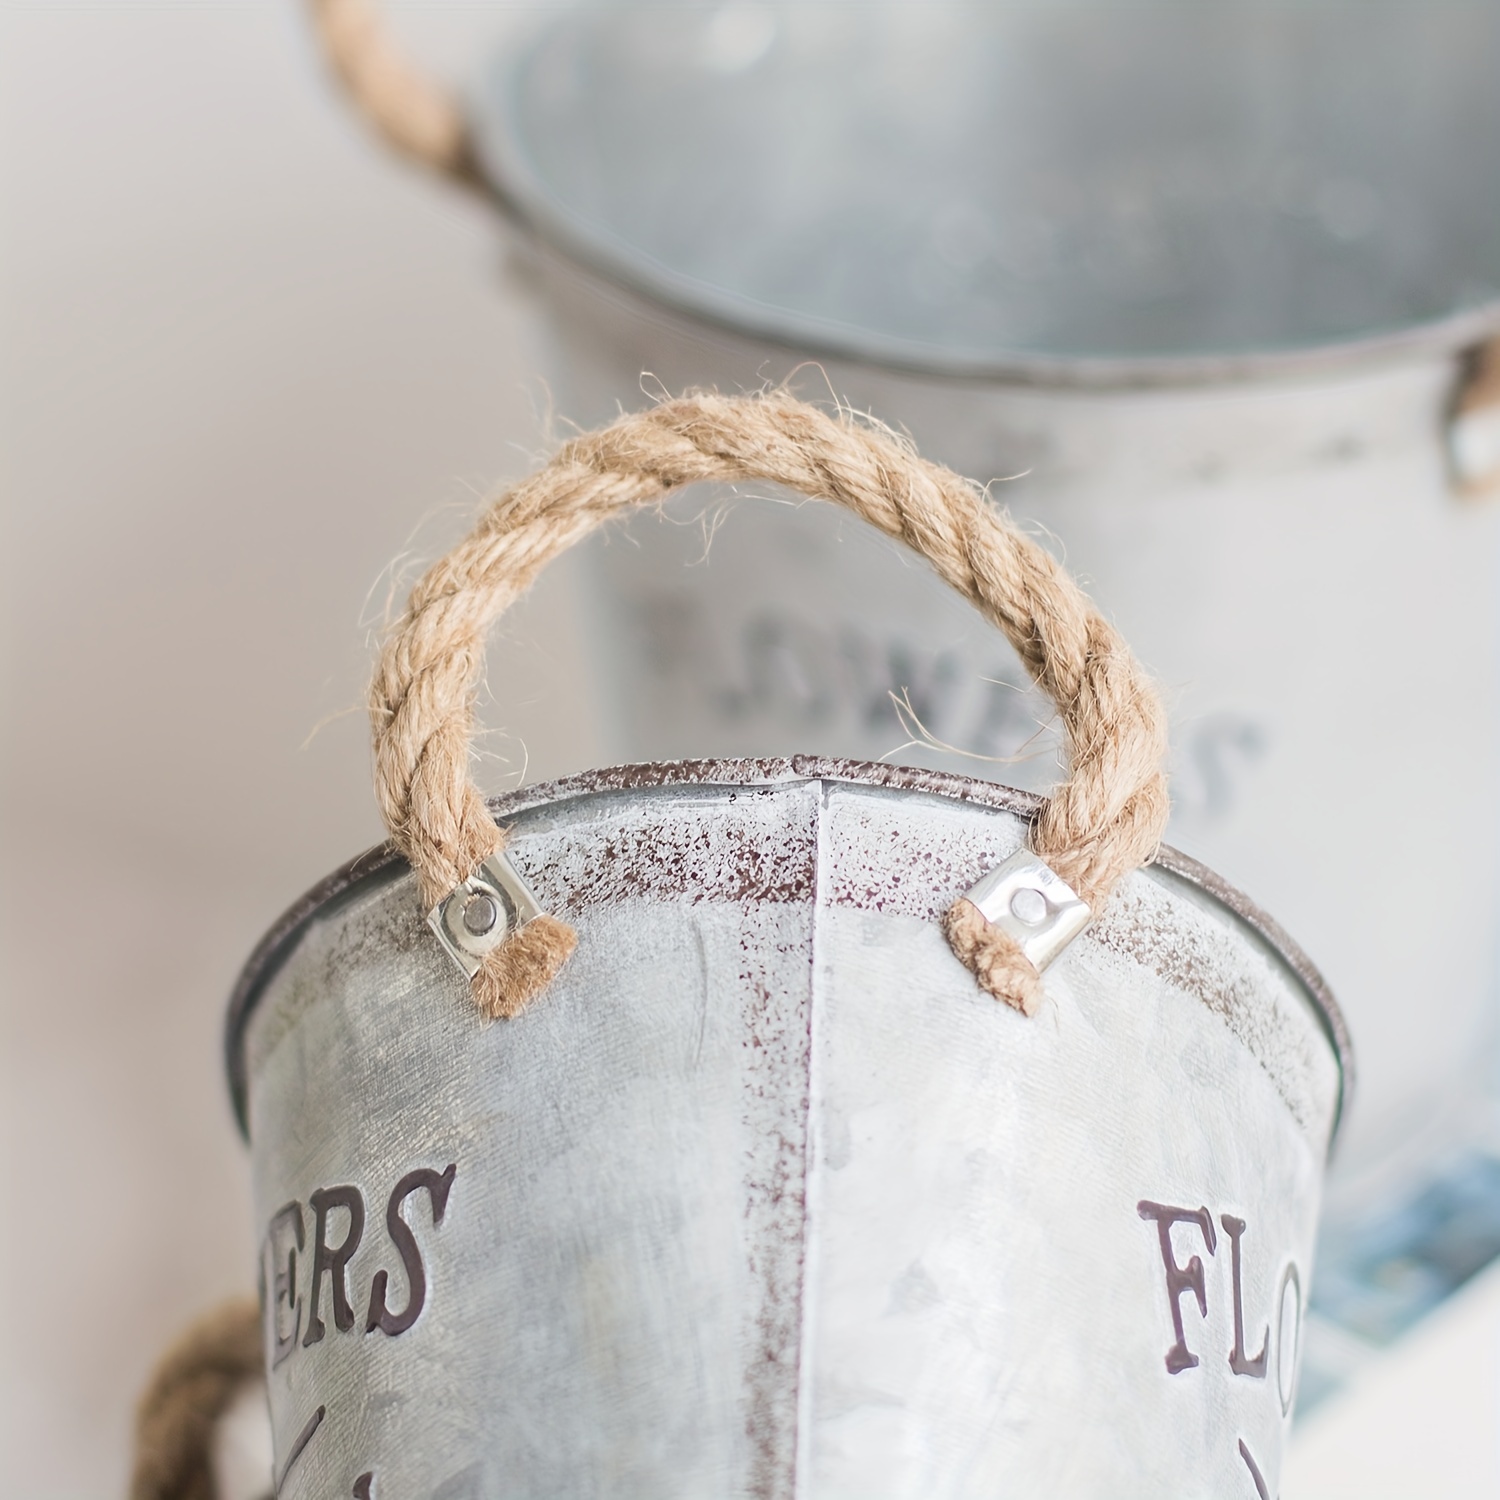 Small 6 Round Metal Bucket With Handle, Vintage Rustic Farmhouse